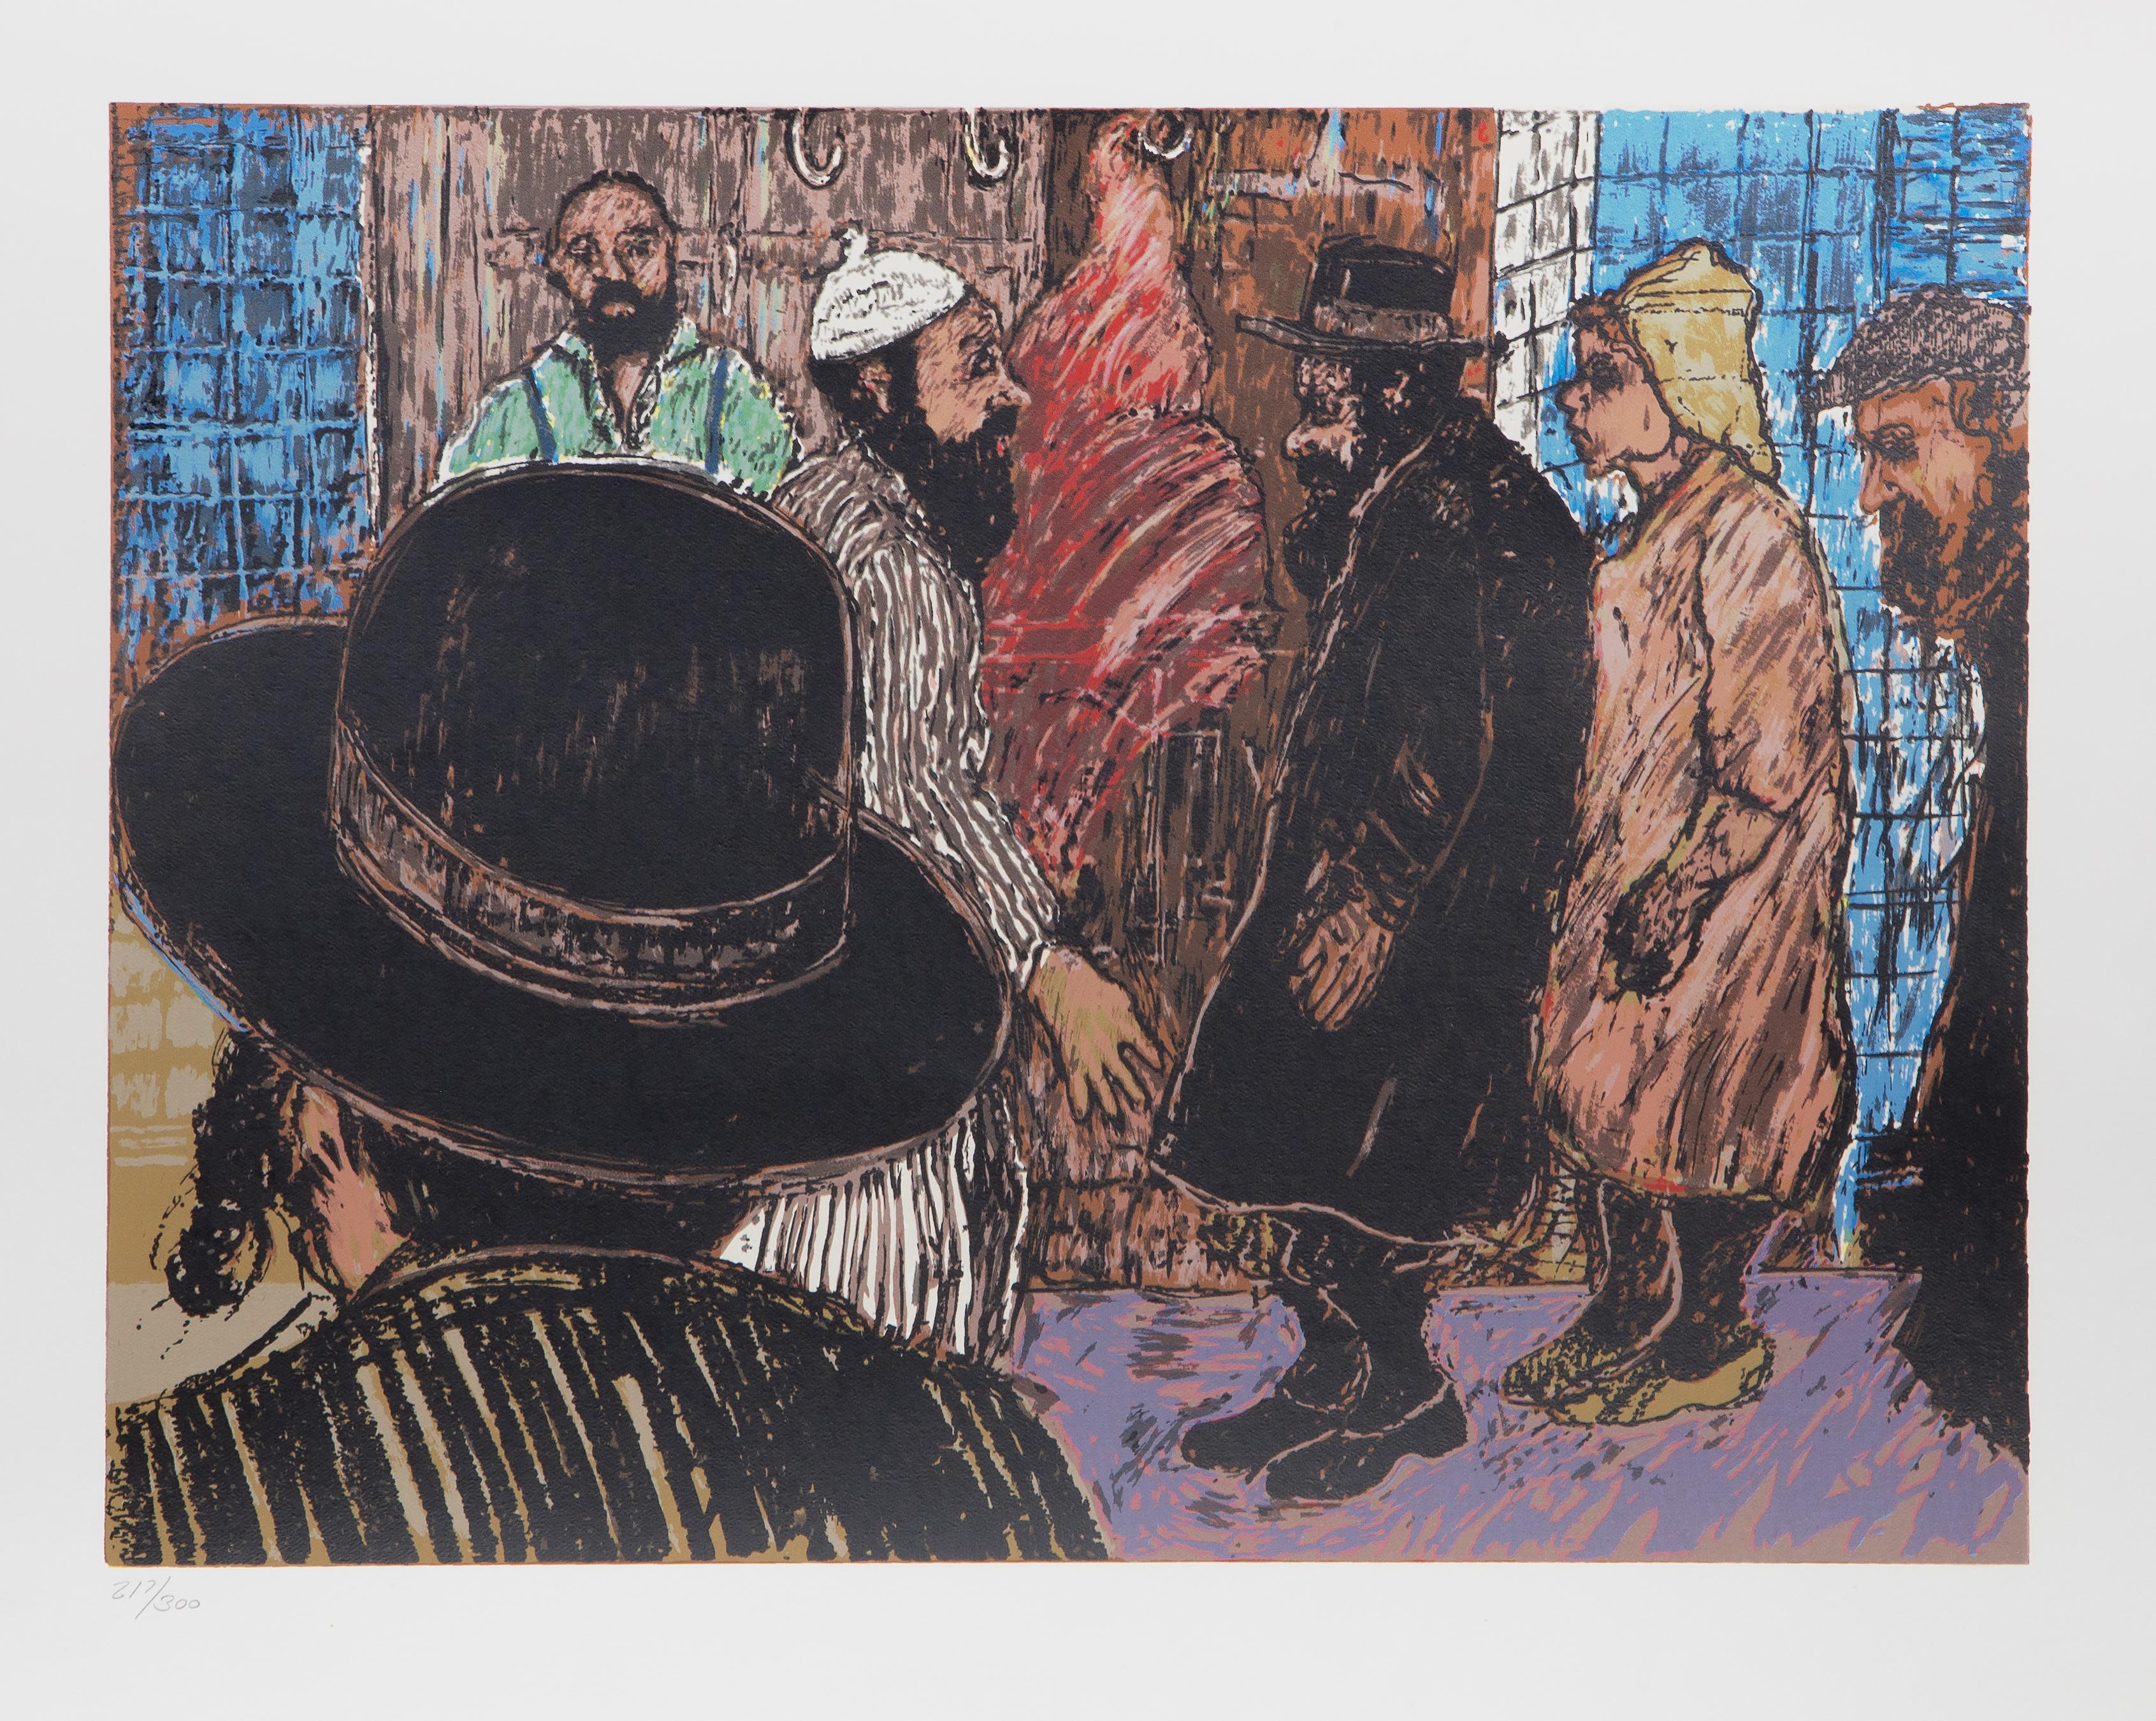 Hasidic Neighborhood
David Azuz, Israeli/French (1942–2014)
Date: circa 1980
Lithograph, numbered in pencil
Edition of 217/300
Image Size: 19.5 x 25.5 inches
Size: 26 x 32.5 in. (66.04 x 82.55 cm)